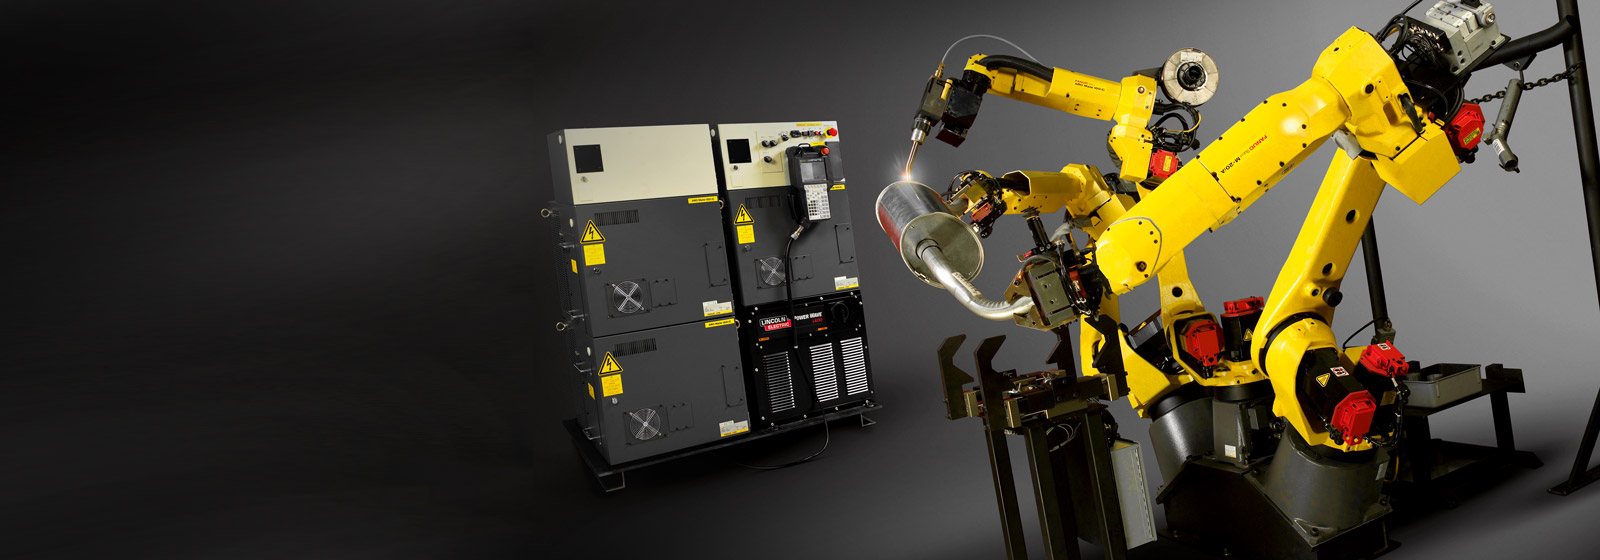 Three welding robots and control units